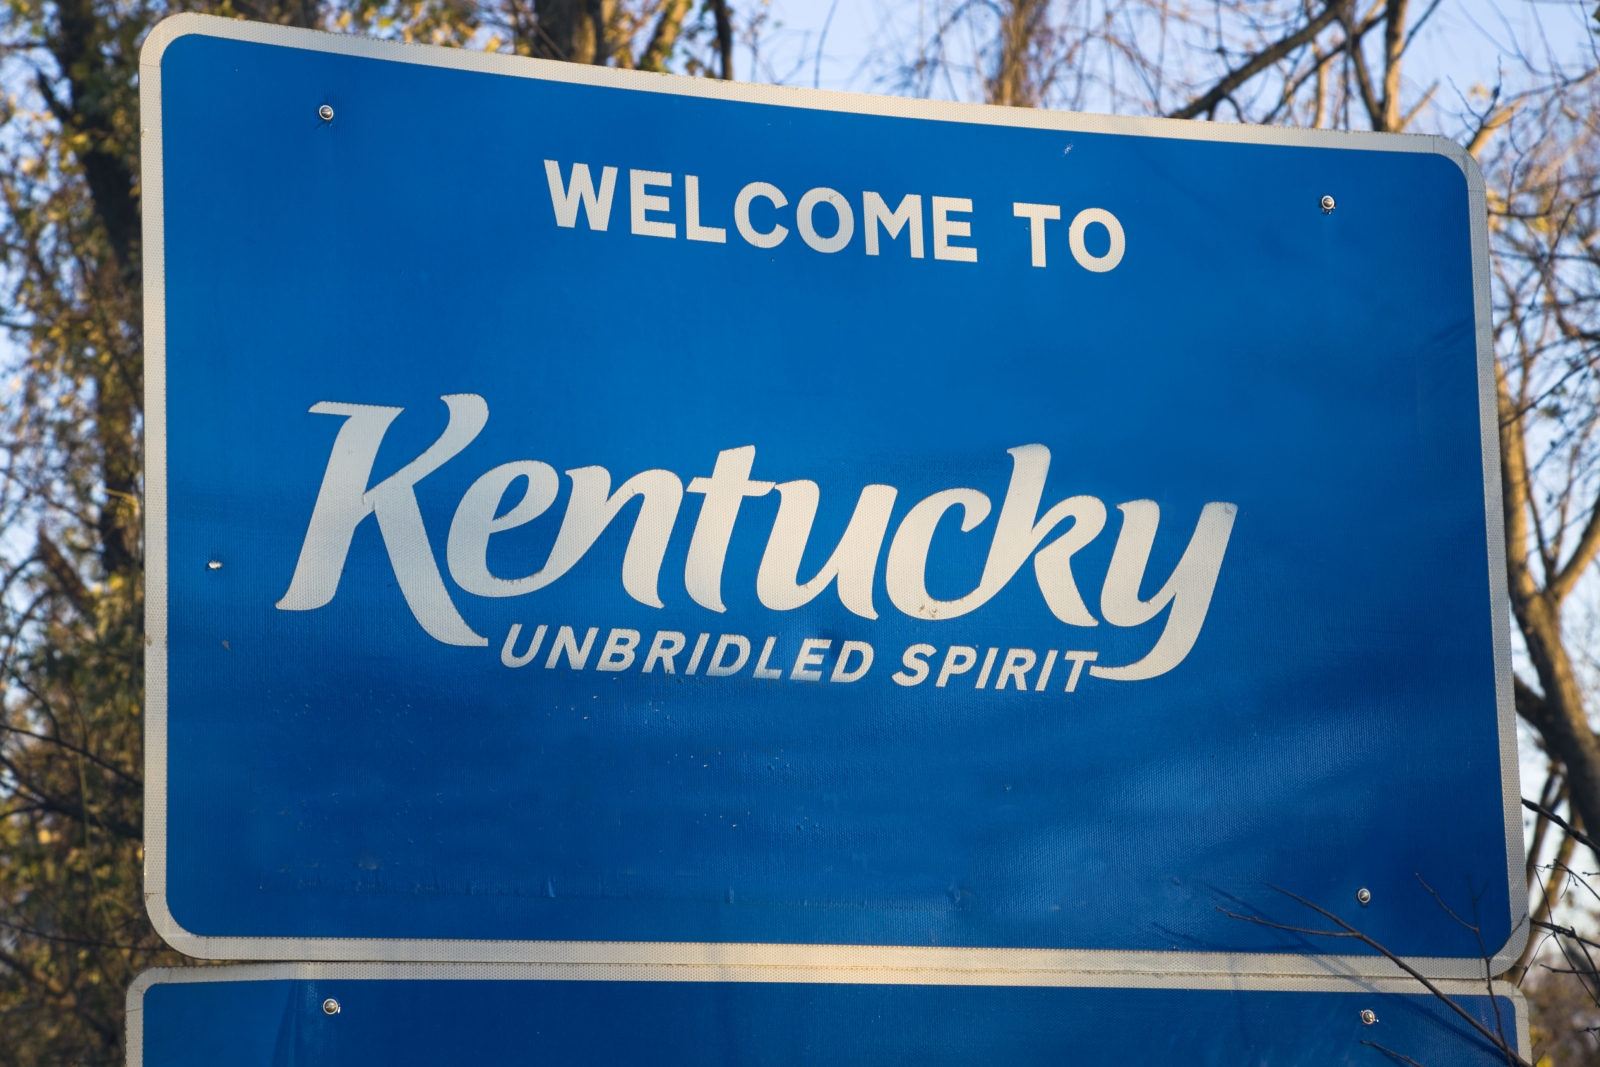 blue road sign that reads "Welcome to Kentucky"